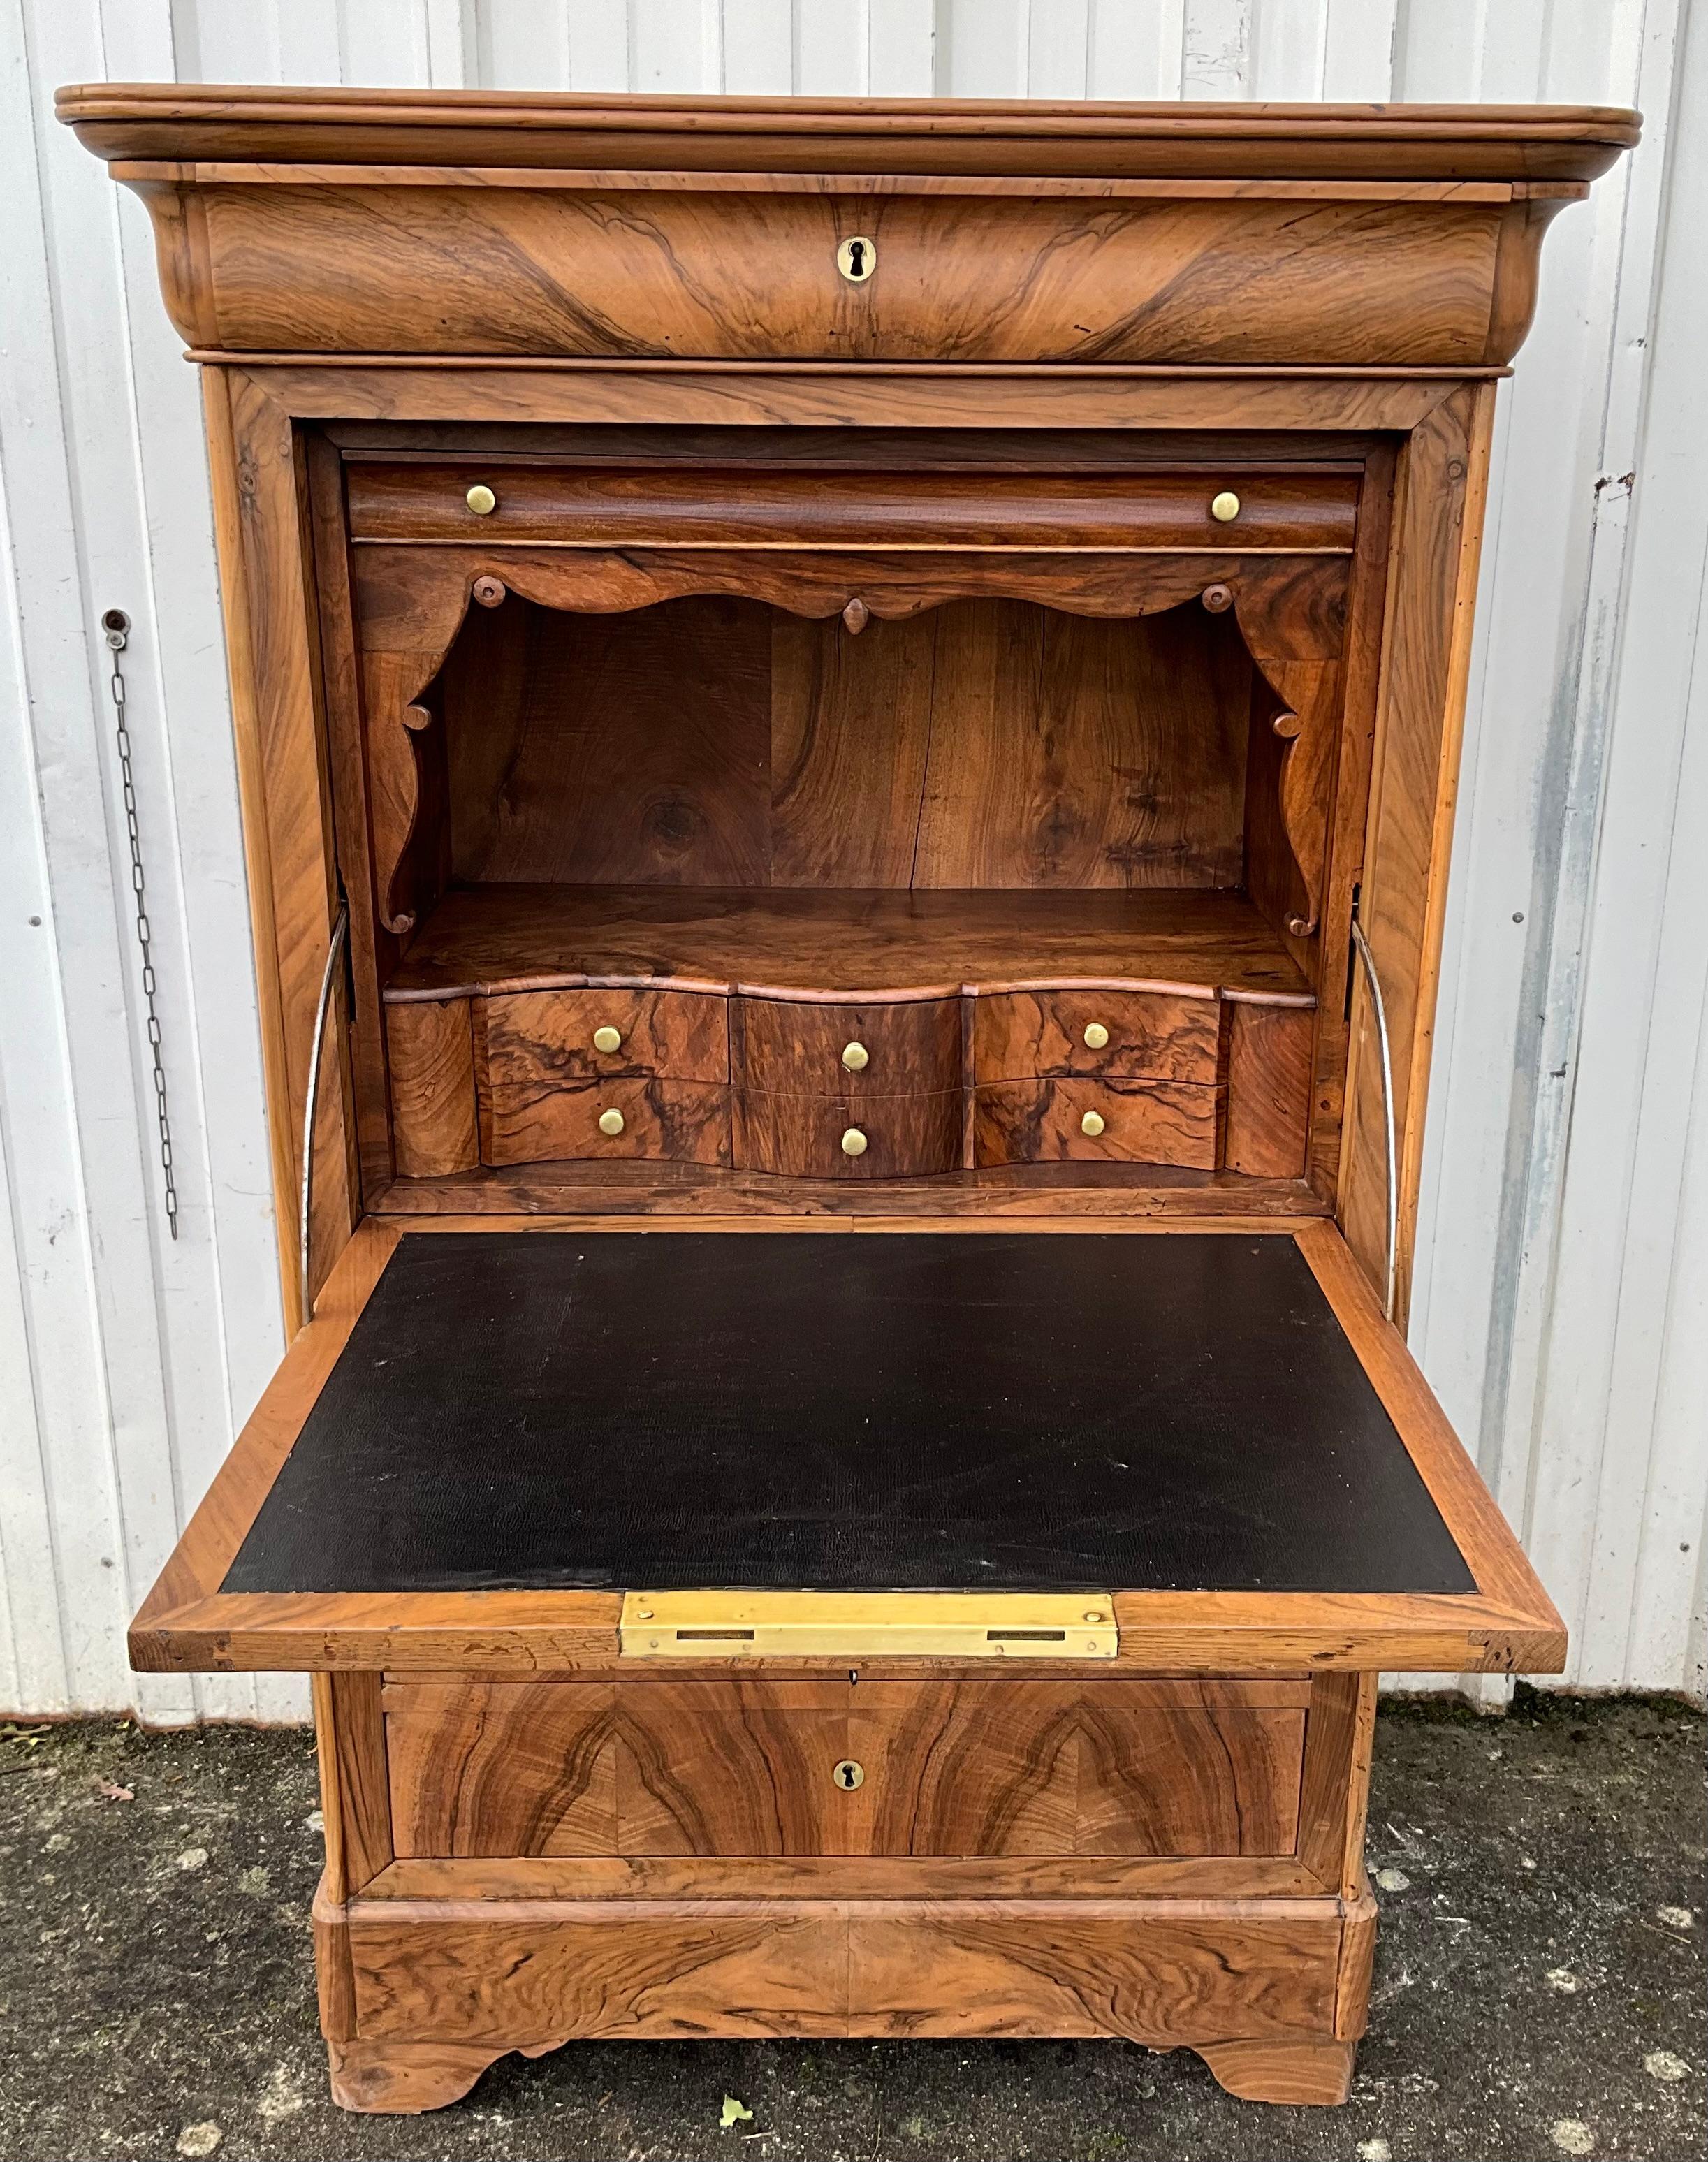 Secretary period Louis Philippe, mid 19th century, is in walnut bramble.

A video of this piece of furniture is available on Instagram. Join me at: antiquites_guideau.

Walnut brambles are flamed because they have many aesthetic designs. These